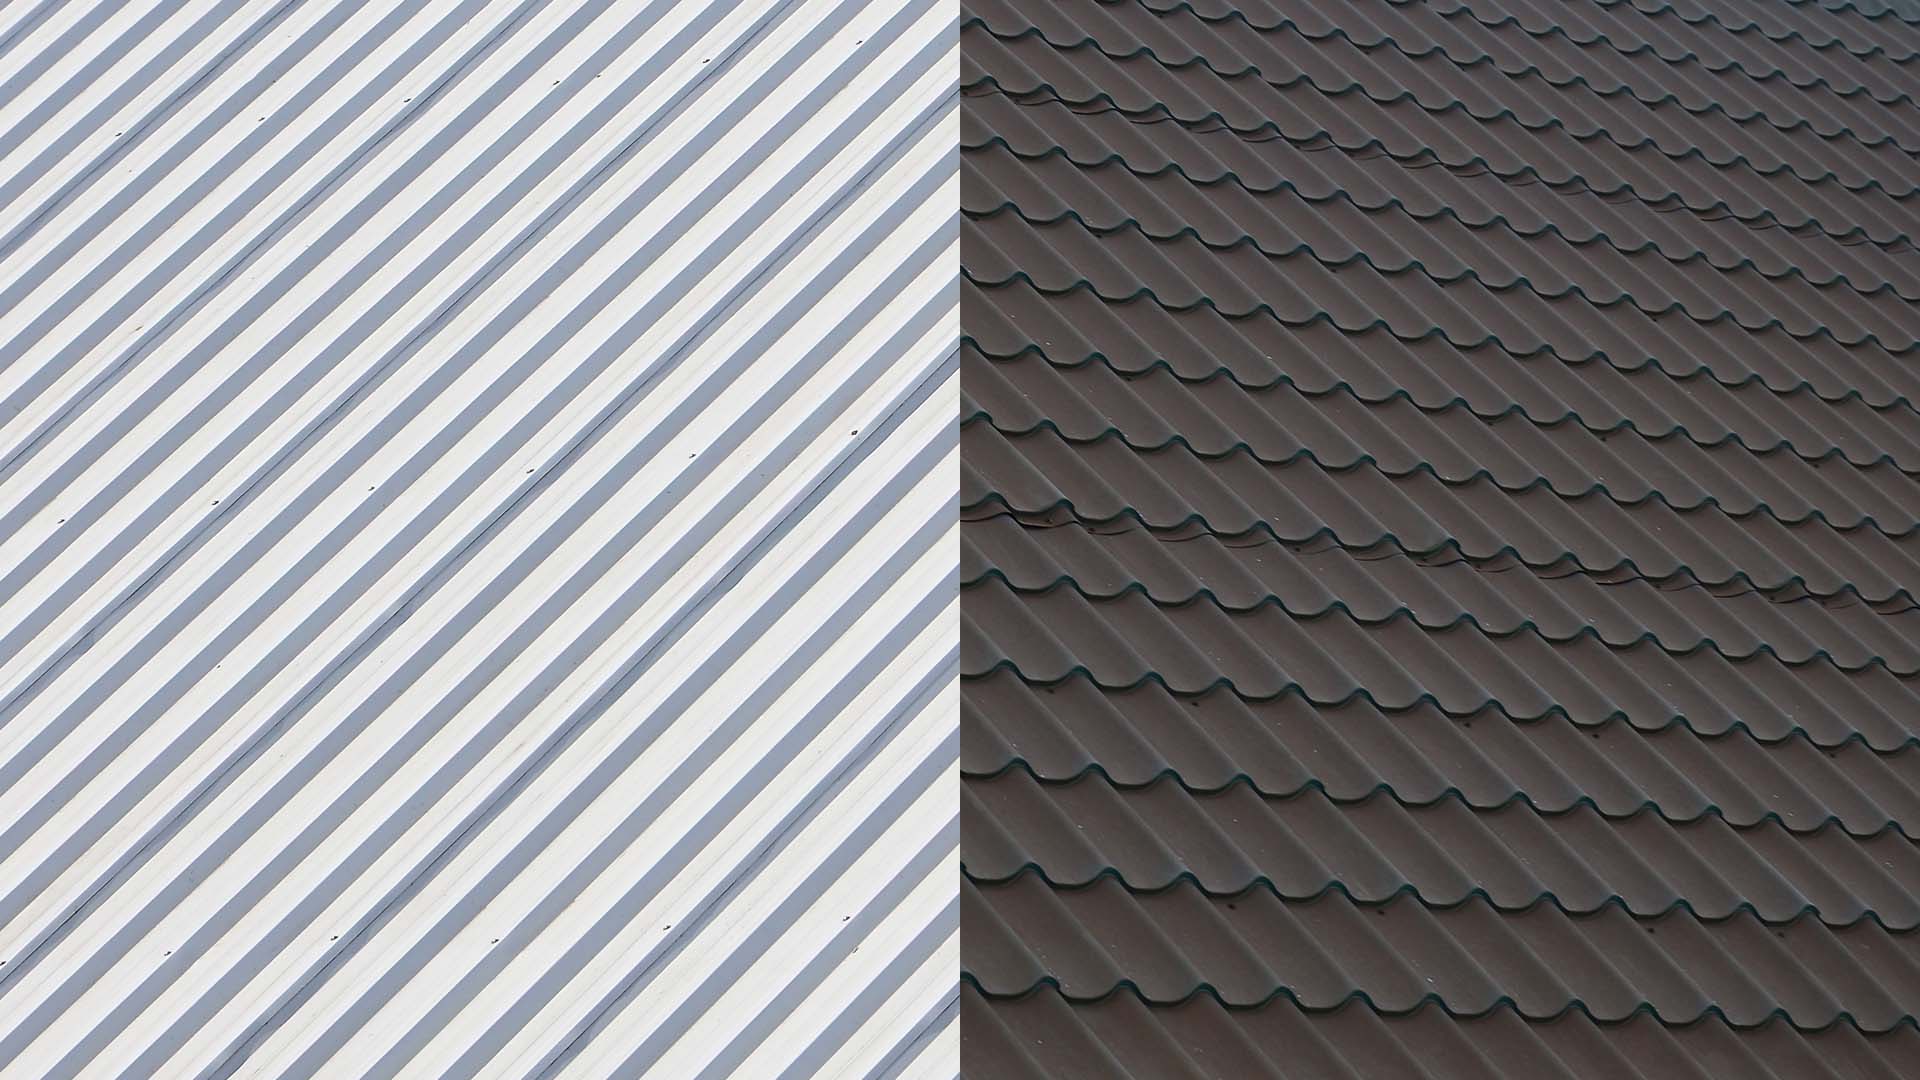 The Difference between Steel roofs and Tile roofs